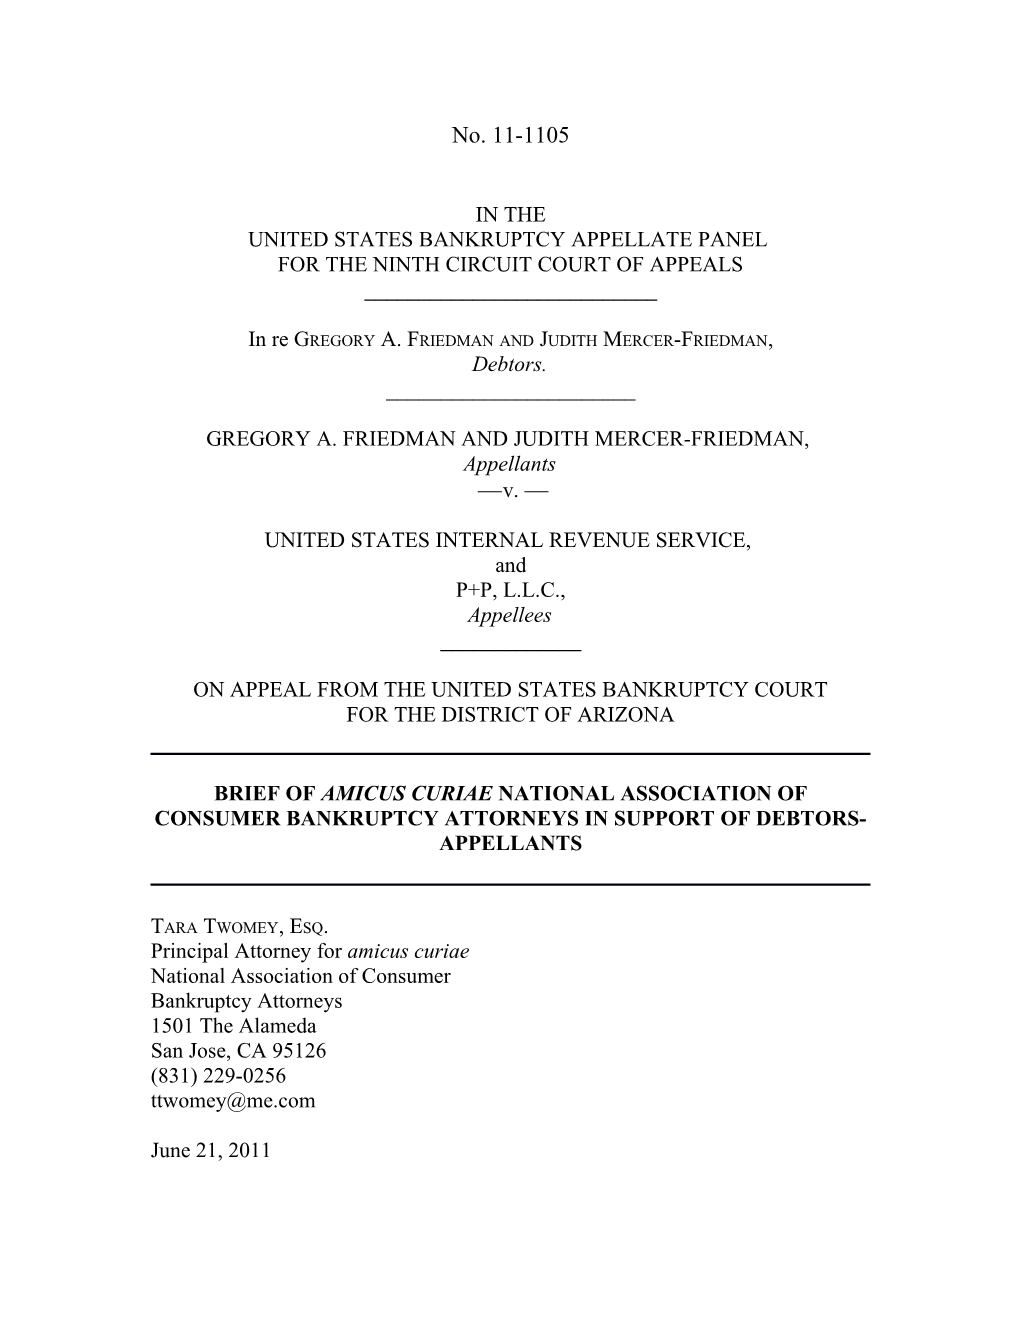 United States Bankruptcy Appellate Panel